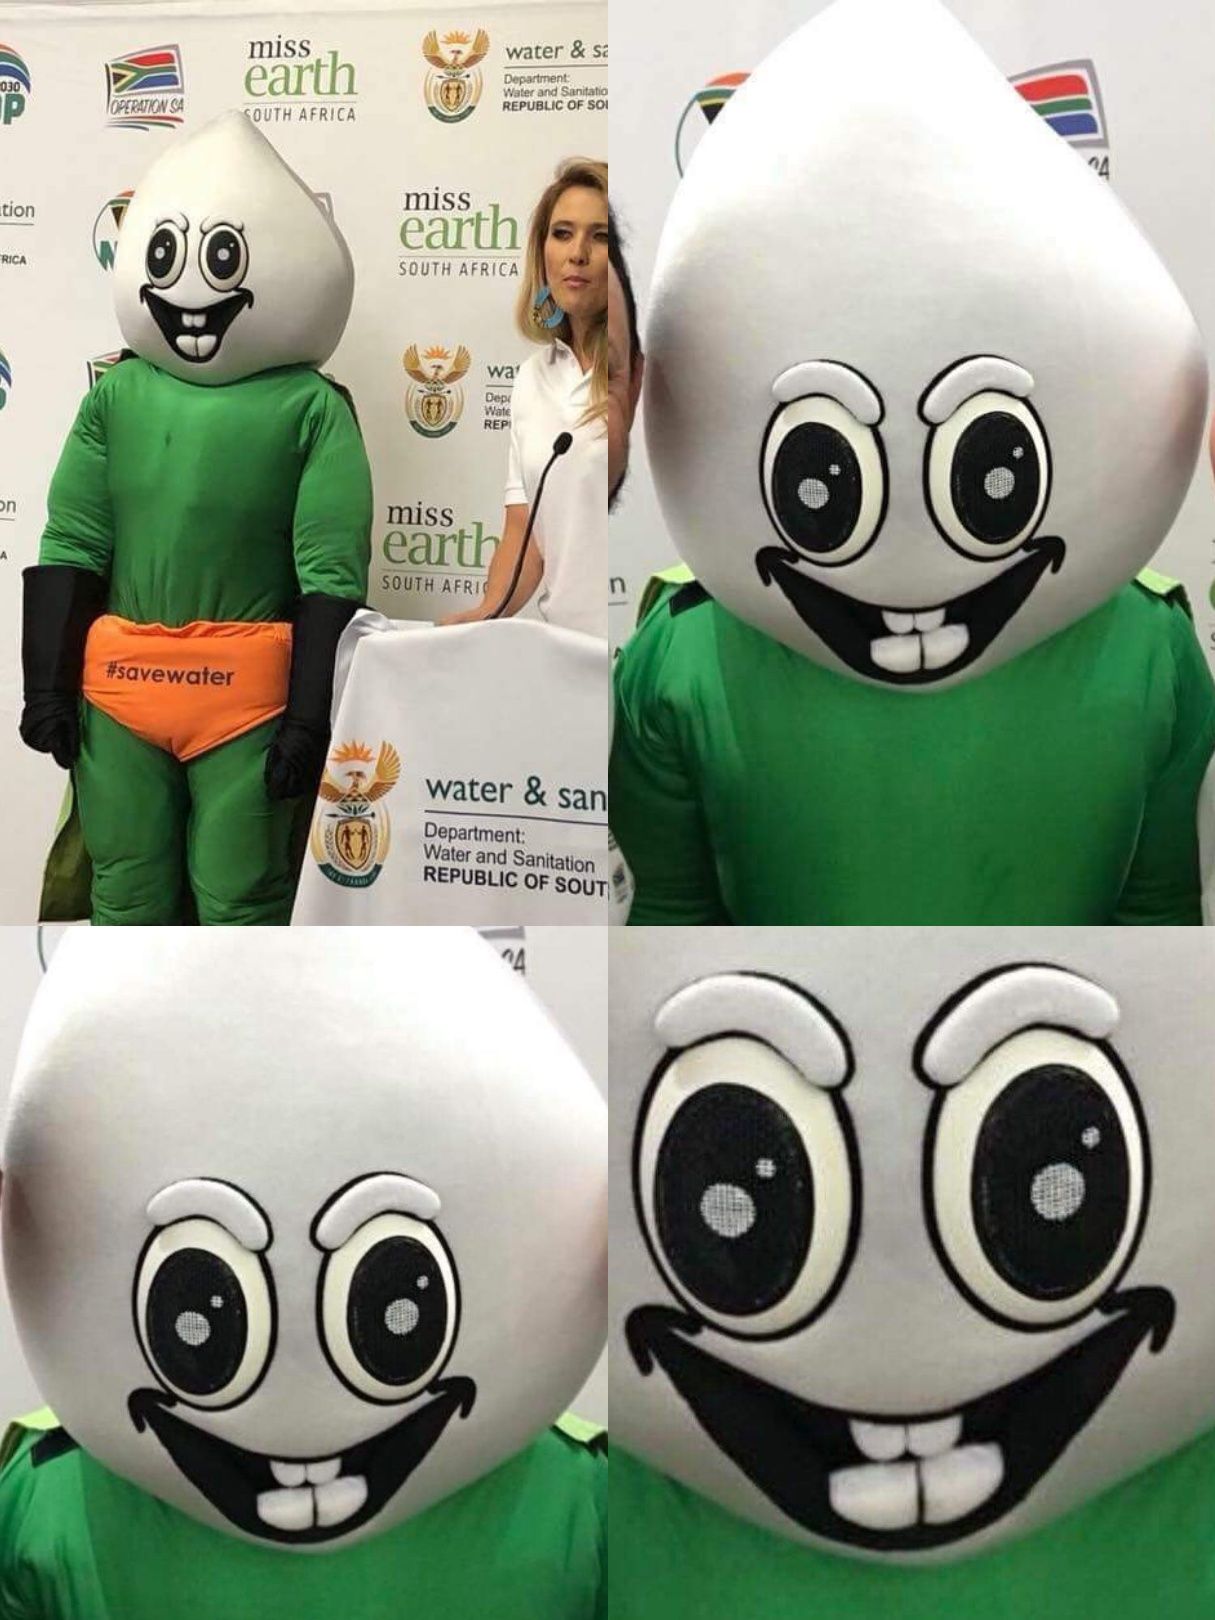 This mascot that's supposed to encourage kids to save water.